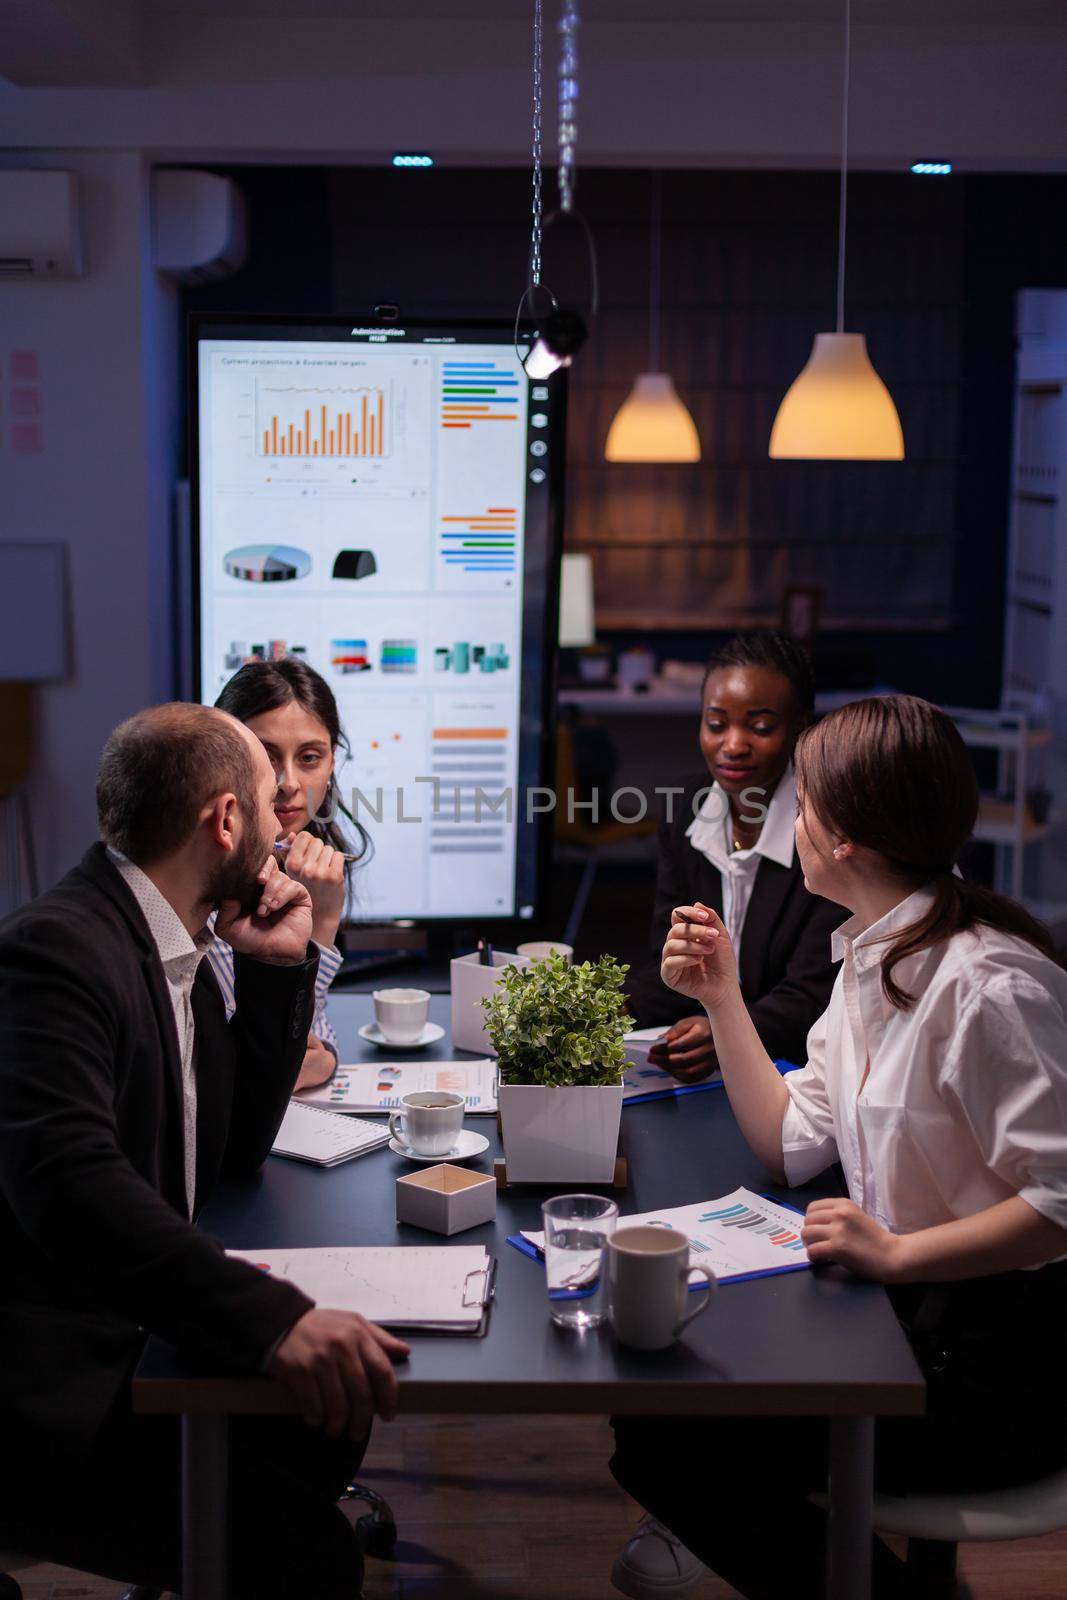 Workaholics businesspeople brainstorming financial company ideas analyzing strategy paperwork late at night in business office meeting room. Multi-ethnic coworkers checking solution